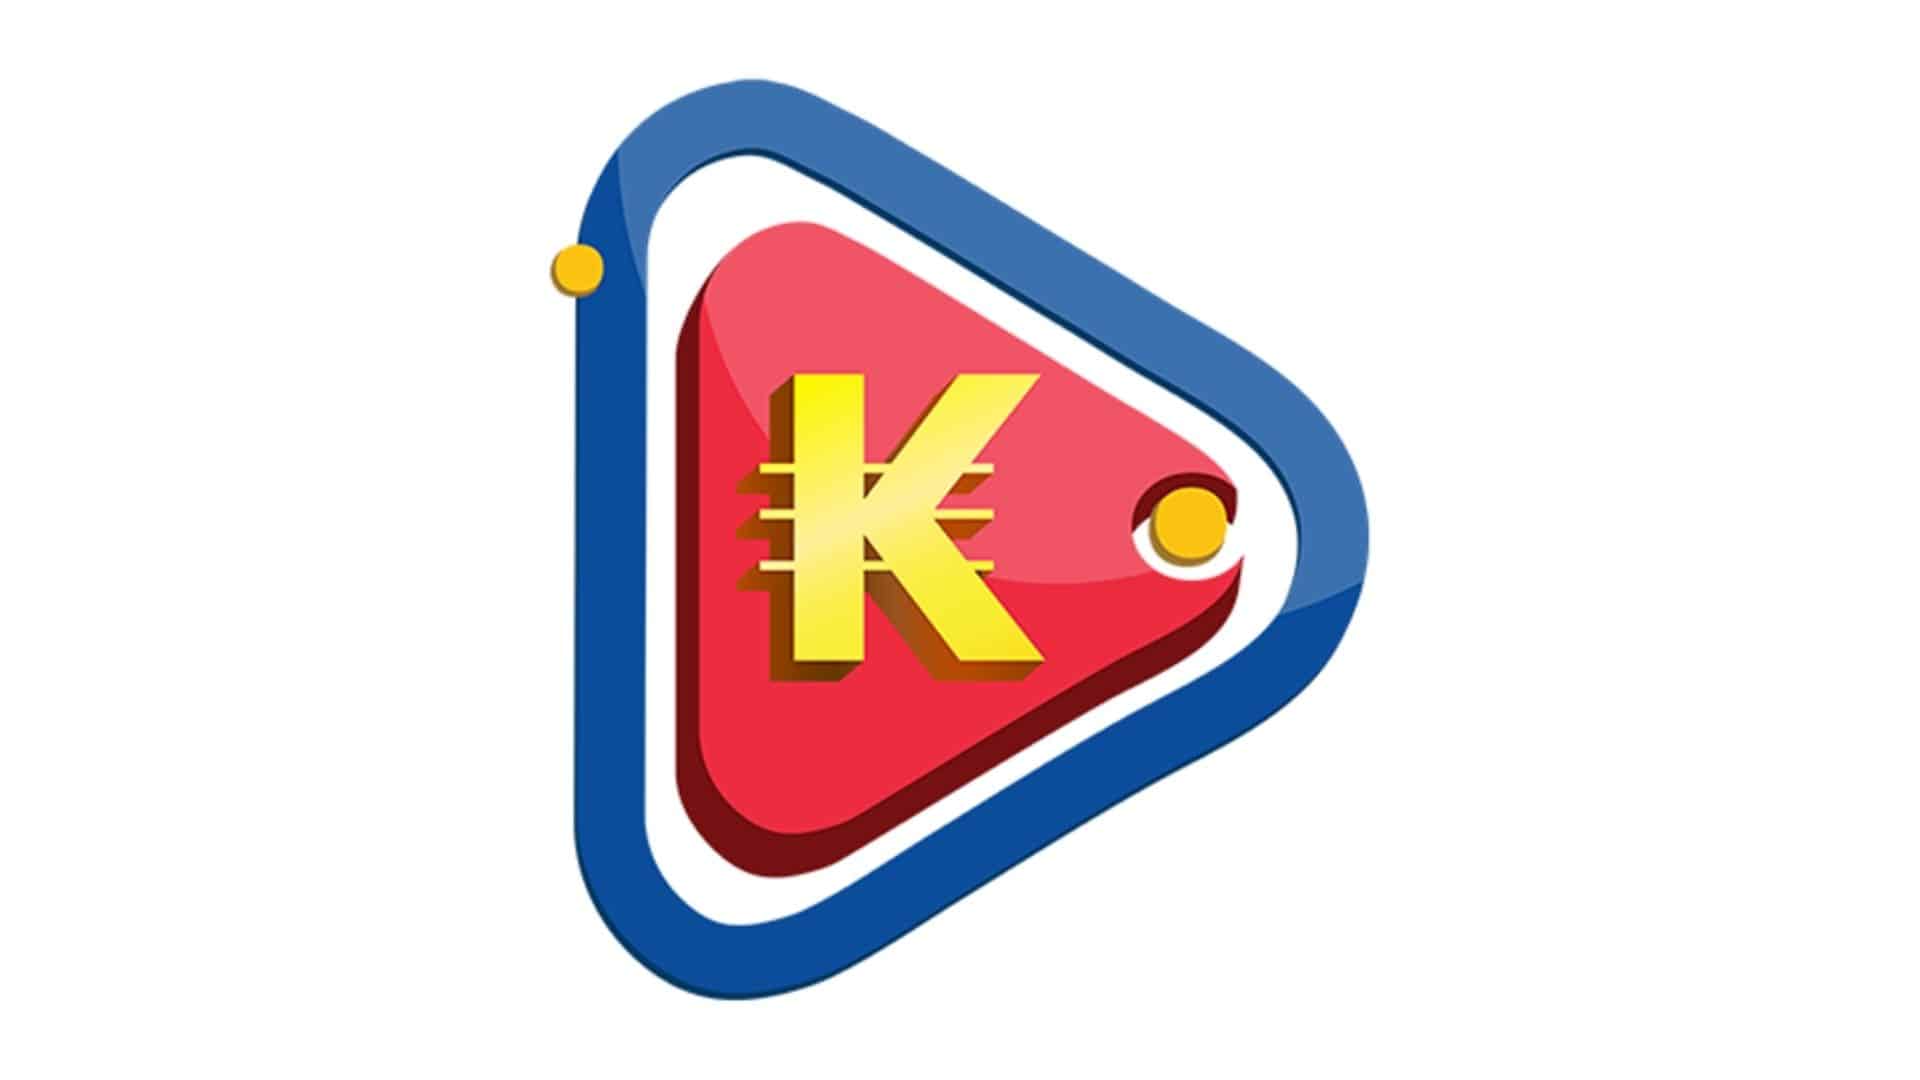 KIKO TV raises funds in pre-Series A led by SOSV